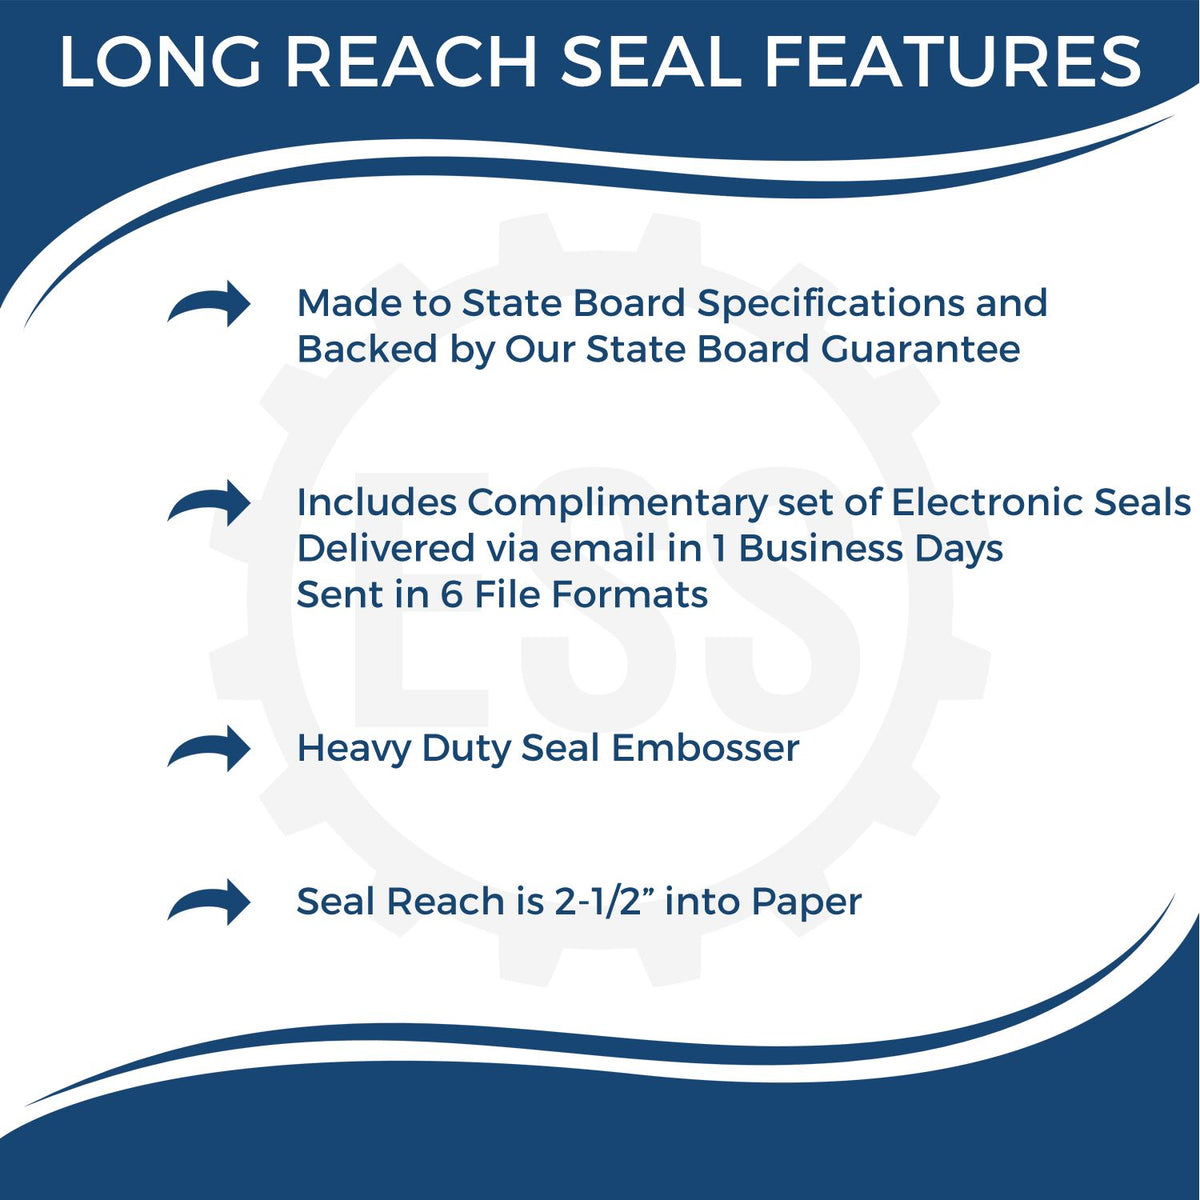 A picture of an infographic highlighting the selling points for the Long Reach Oklahoma Geology Seal